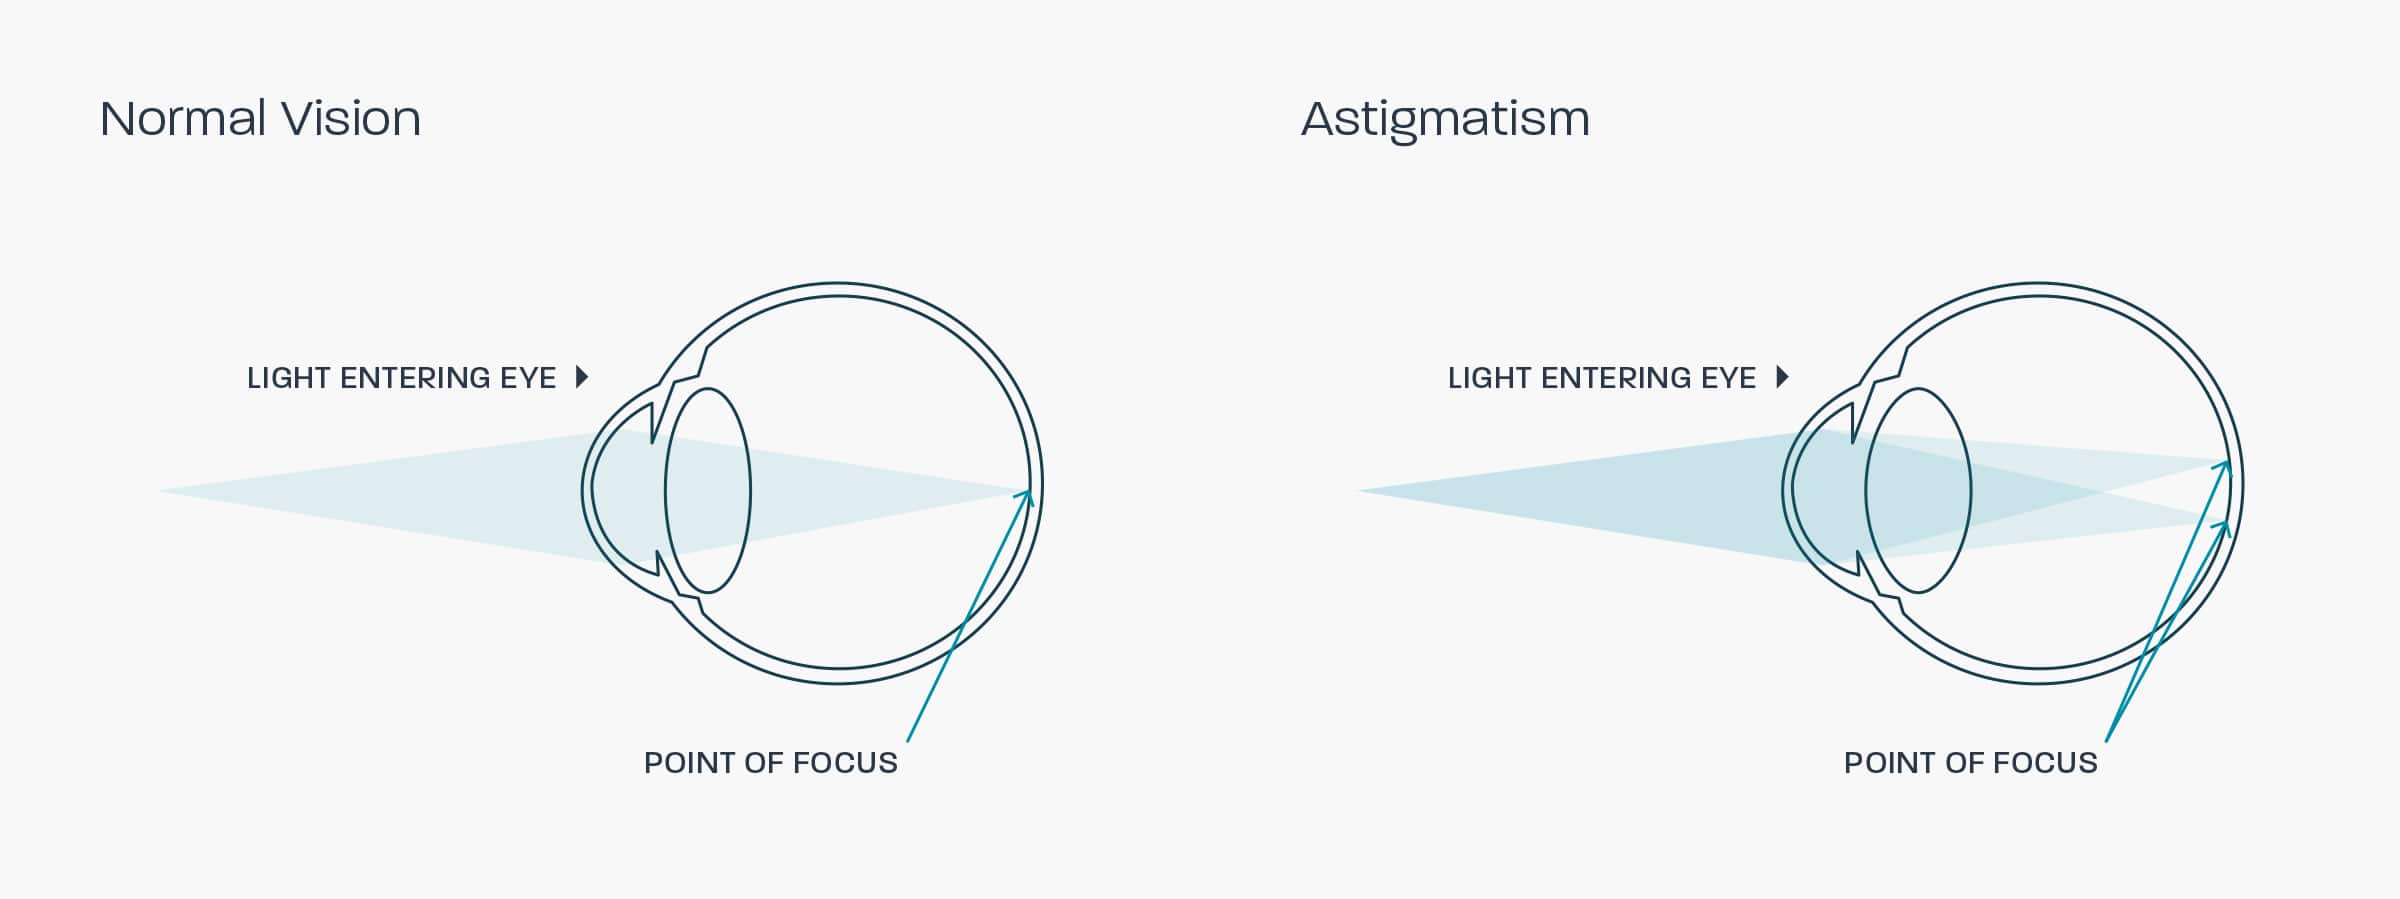 A graphic showing how astigmatism affects the eye